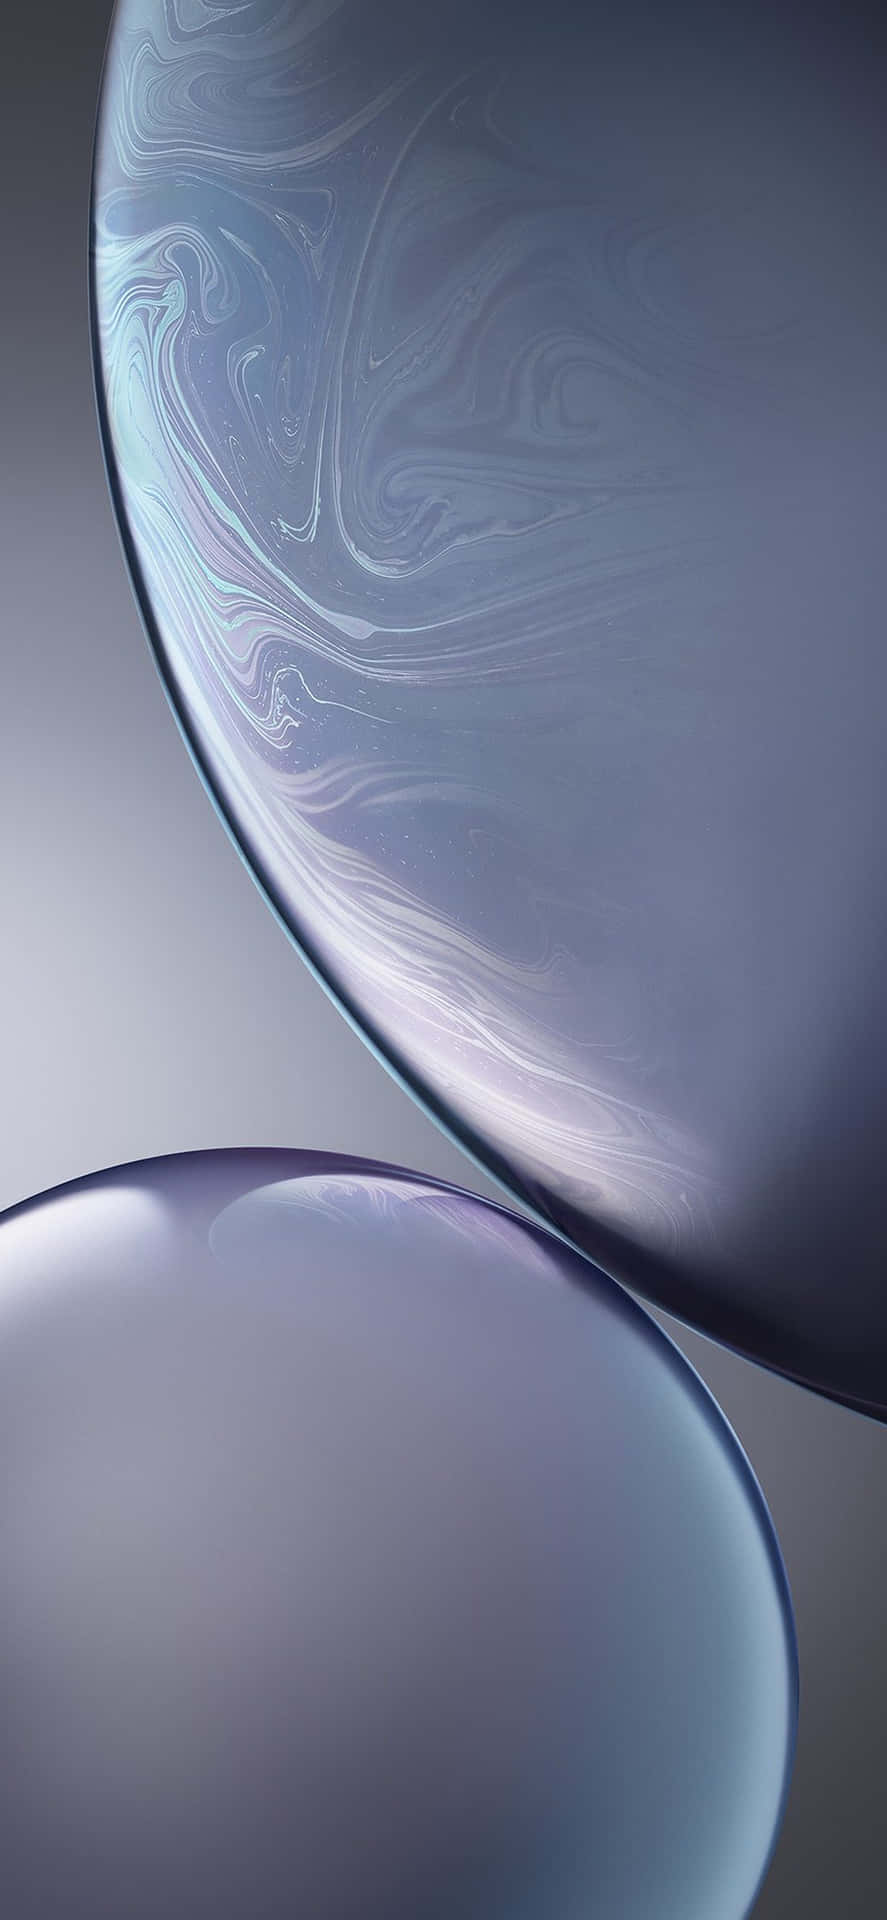 Iphone Xs Max Apple Background Gray Bubbles